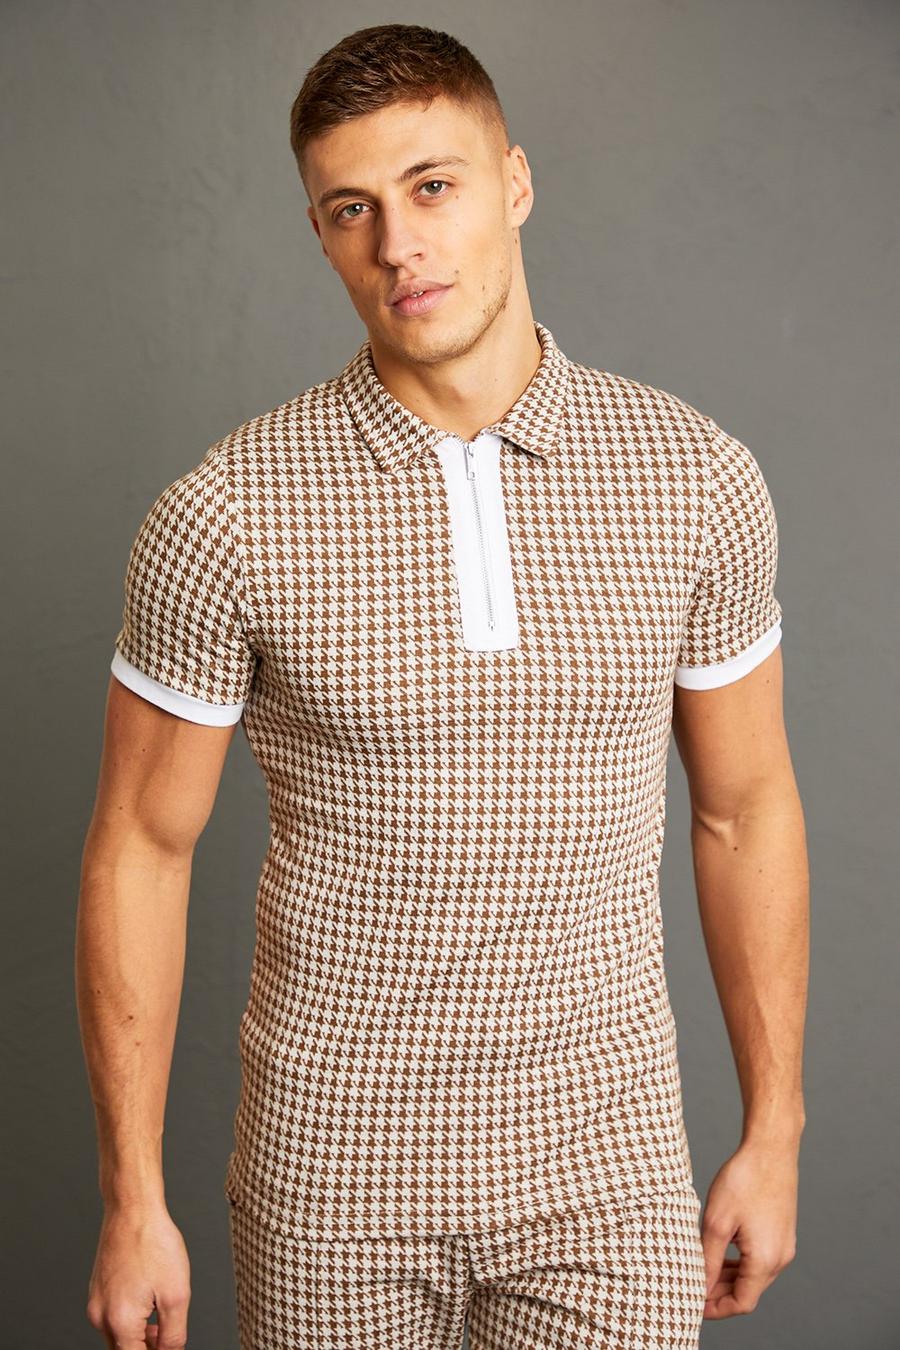 Chocolate brun Muscle Fit Houndstooth Jacquard Zip Polo